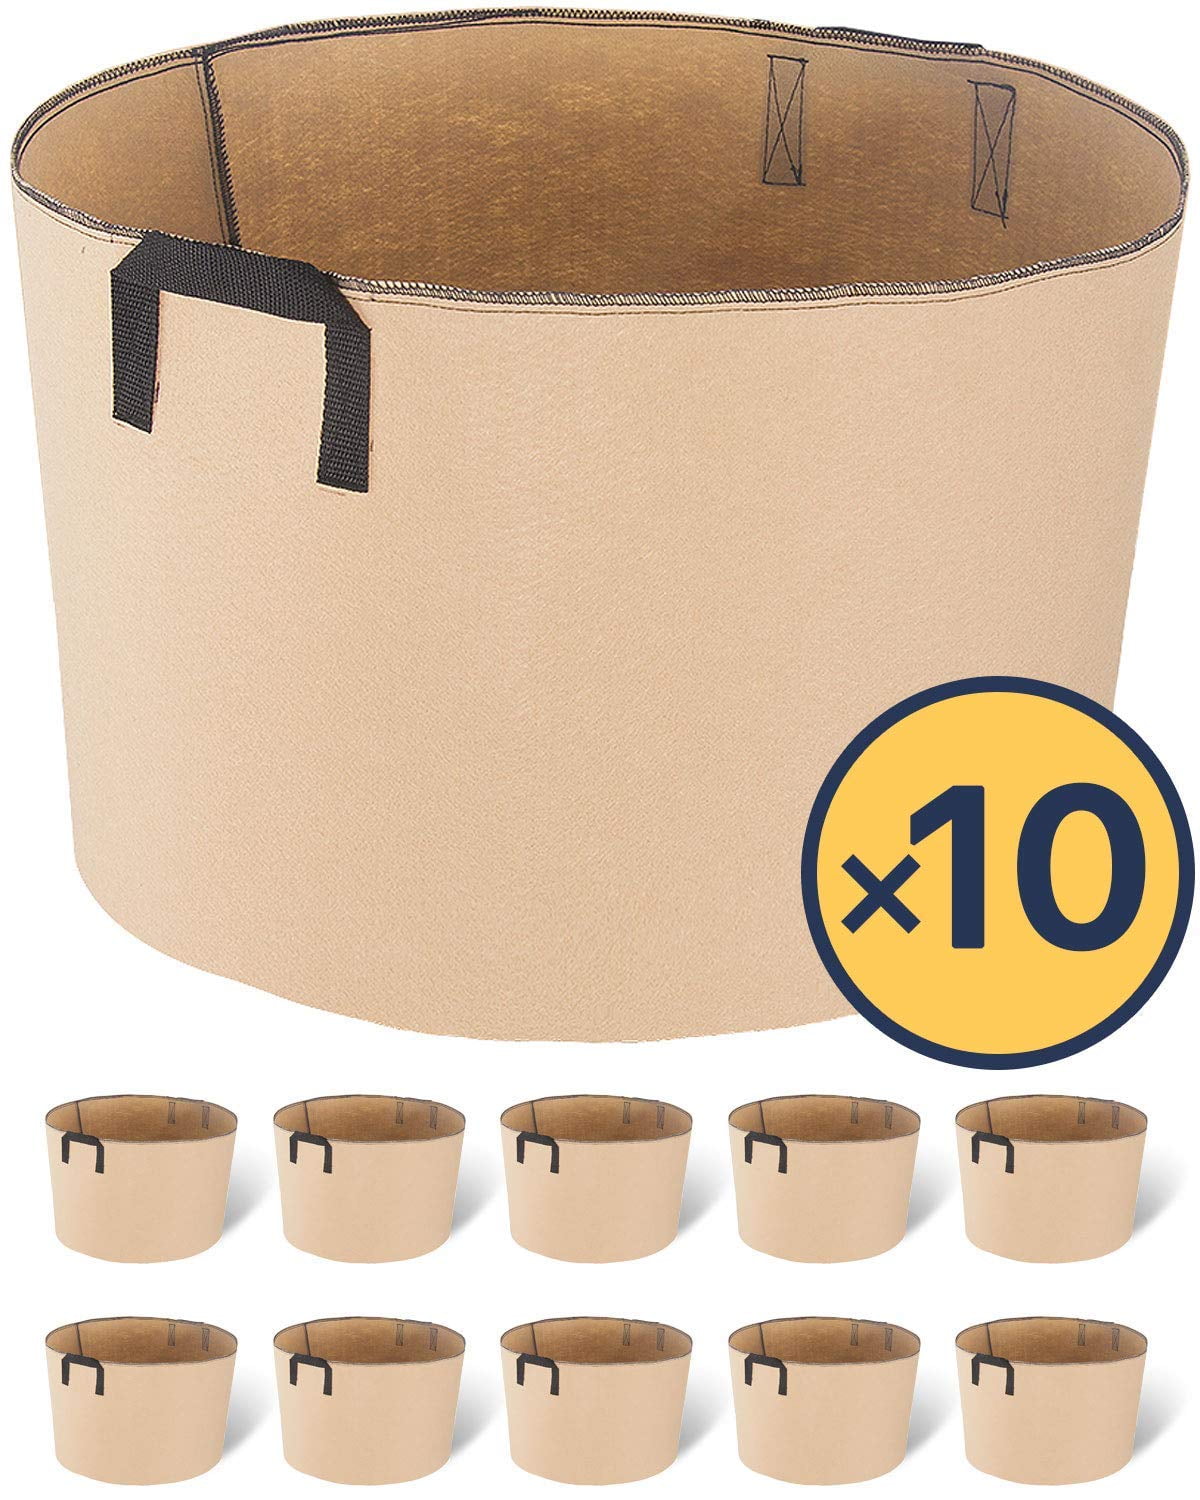 iPower 5-PACK Plant Grow Bags Fabric Pots with Handles 3 5 7 10 15 20 Gallon 